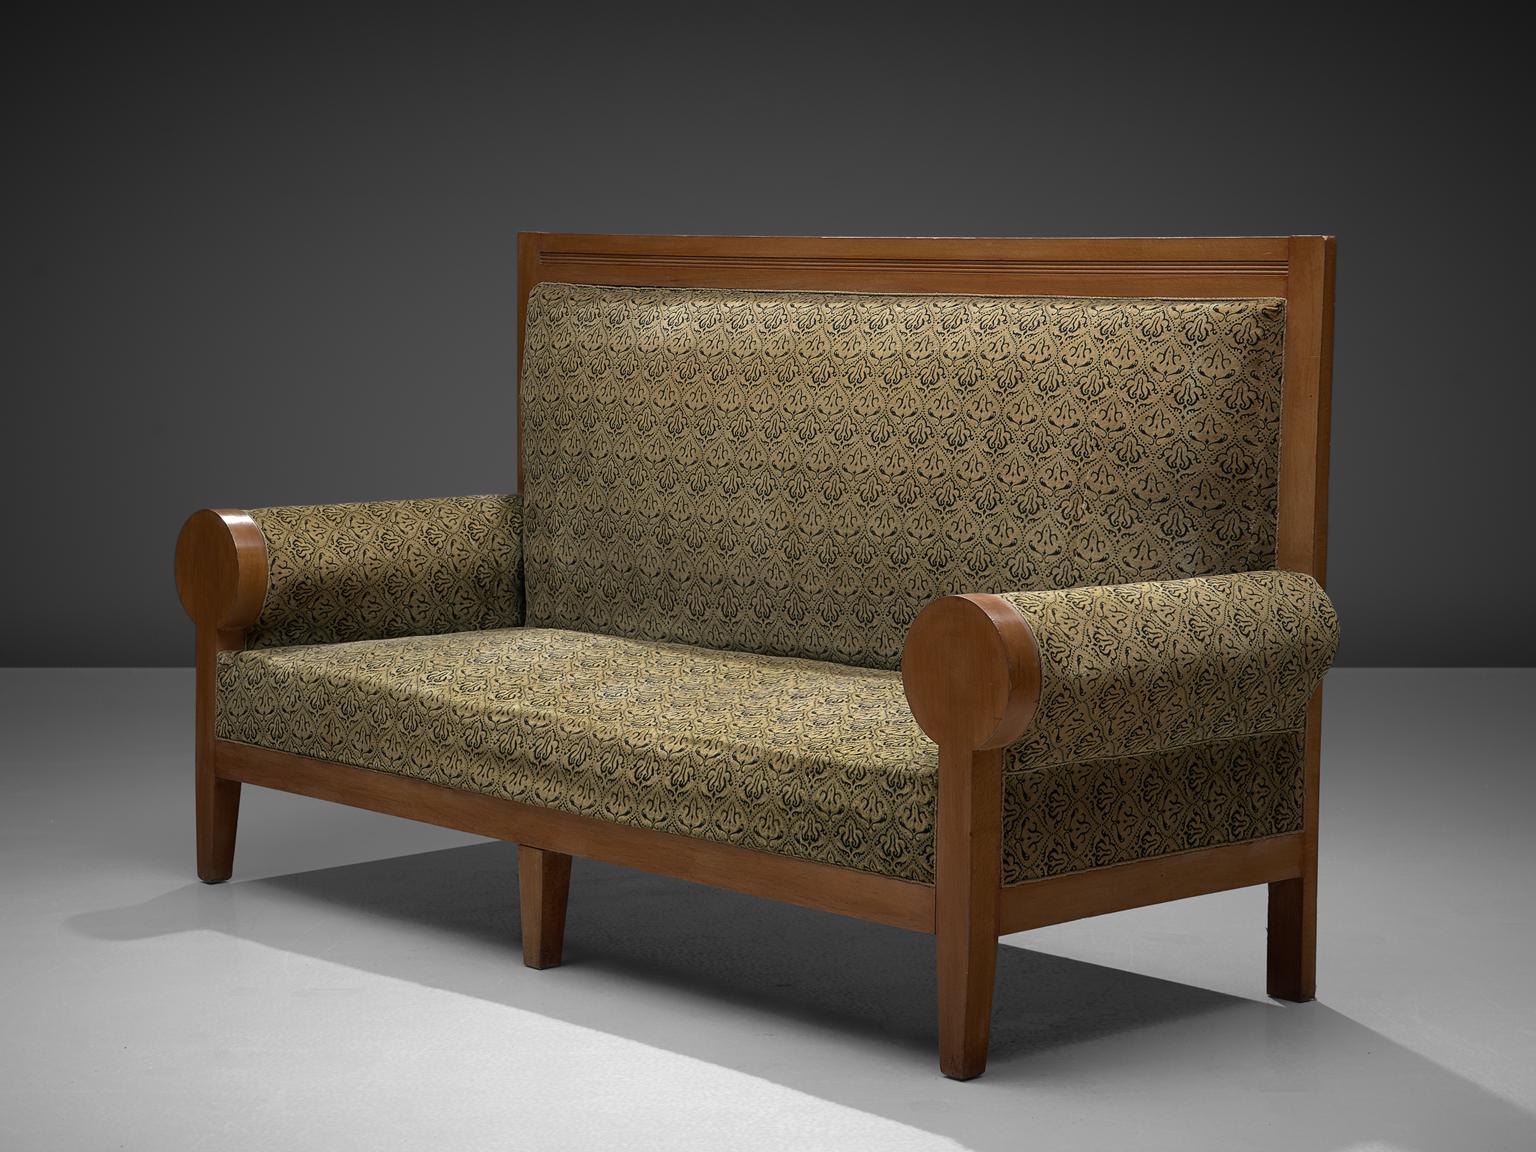 Sofa in beech and fabric, Europe, 1940s.

A stately settee in green fabric upholstery. This bench has a majestic appearance, due the high back and luxurious upholstery. The rounded armrests emphasize this royal expression. The warm colored wood